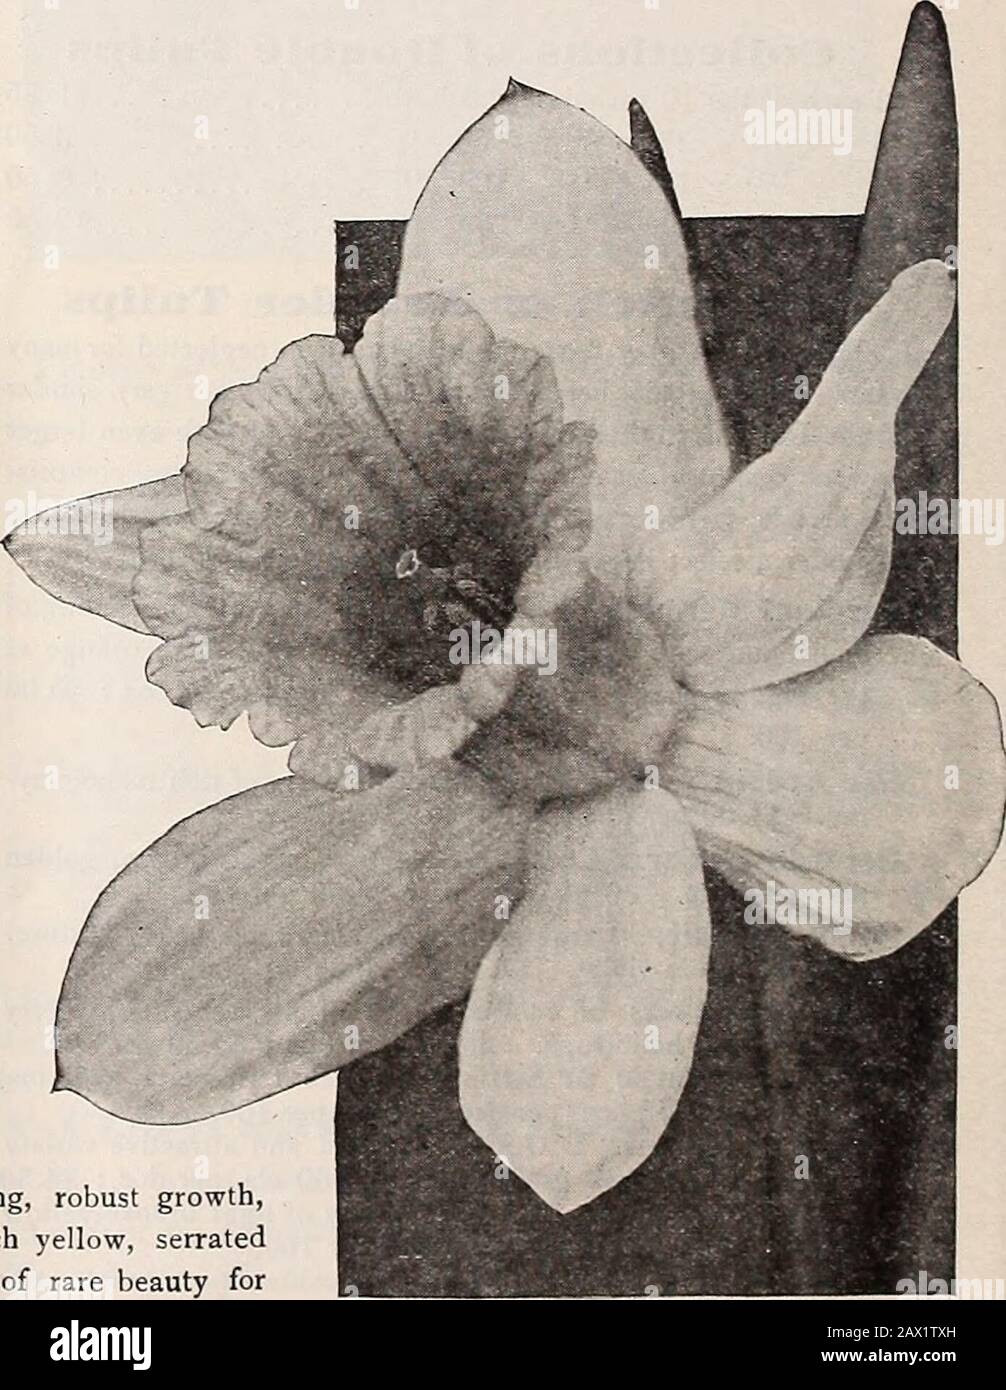 Dreer's autumn catalogue 1920 . deserving of extensiveplanting, and you can set out any of them with full assurancethat you will get a bountiful harvest of blossoms in the spring. Bicolor Victoria. A fine variety, perianth creamy-white,trumpet rich yellow, delicately perfumed; unsurpassed forpot culture and always satisfactory out of doors. 12 cts.each; $1.25 per doz.; $8.00 per 100. Emperor. This grand variety is one of the largest and finest Daffodils in cultivation, pure yellow trumpet of immense size, and wide overlapping, rich primrose perianth; for bedding, naturalising or for growing in Stock Photo